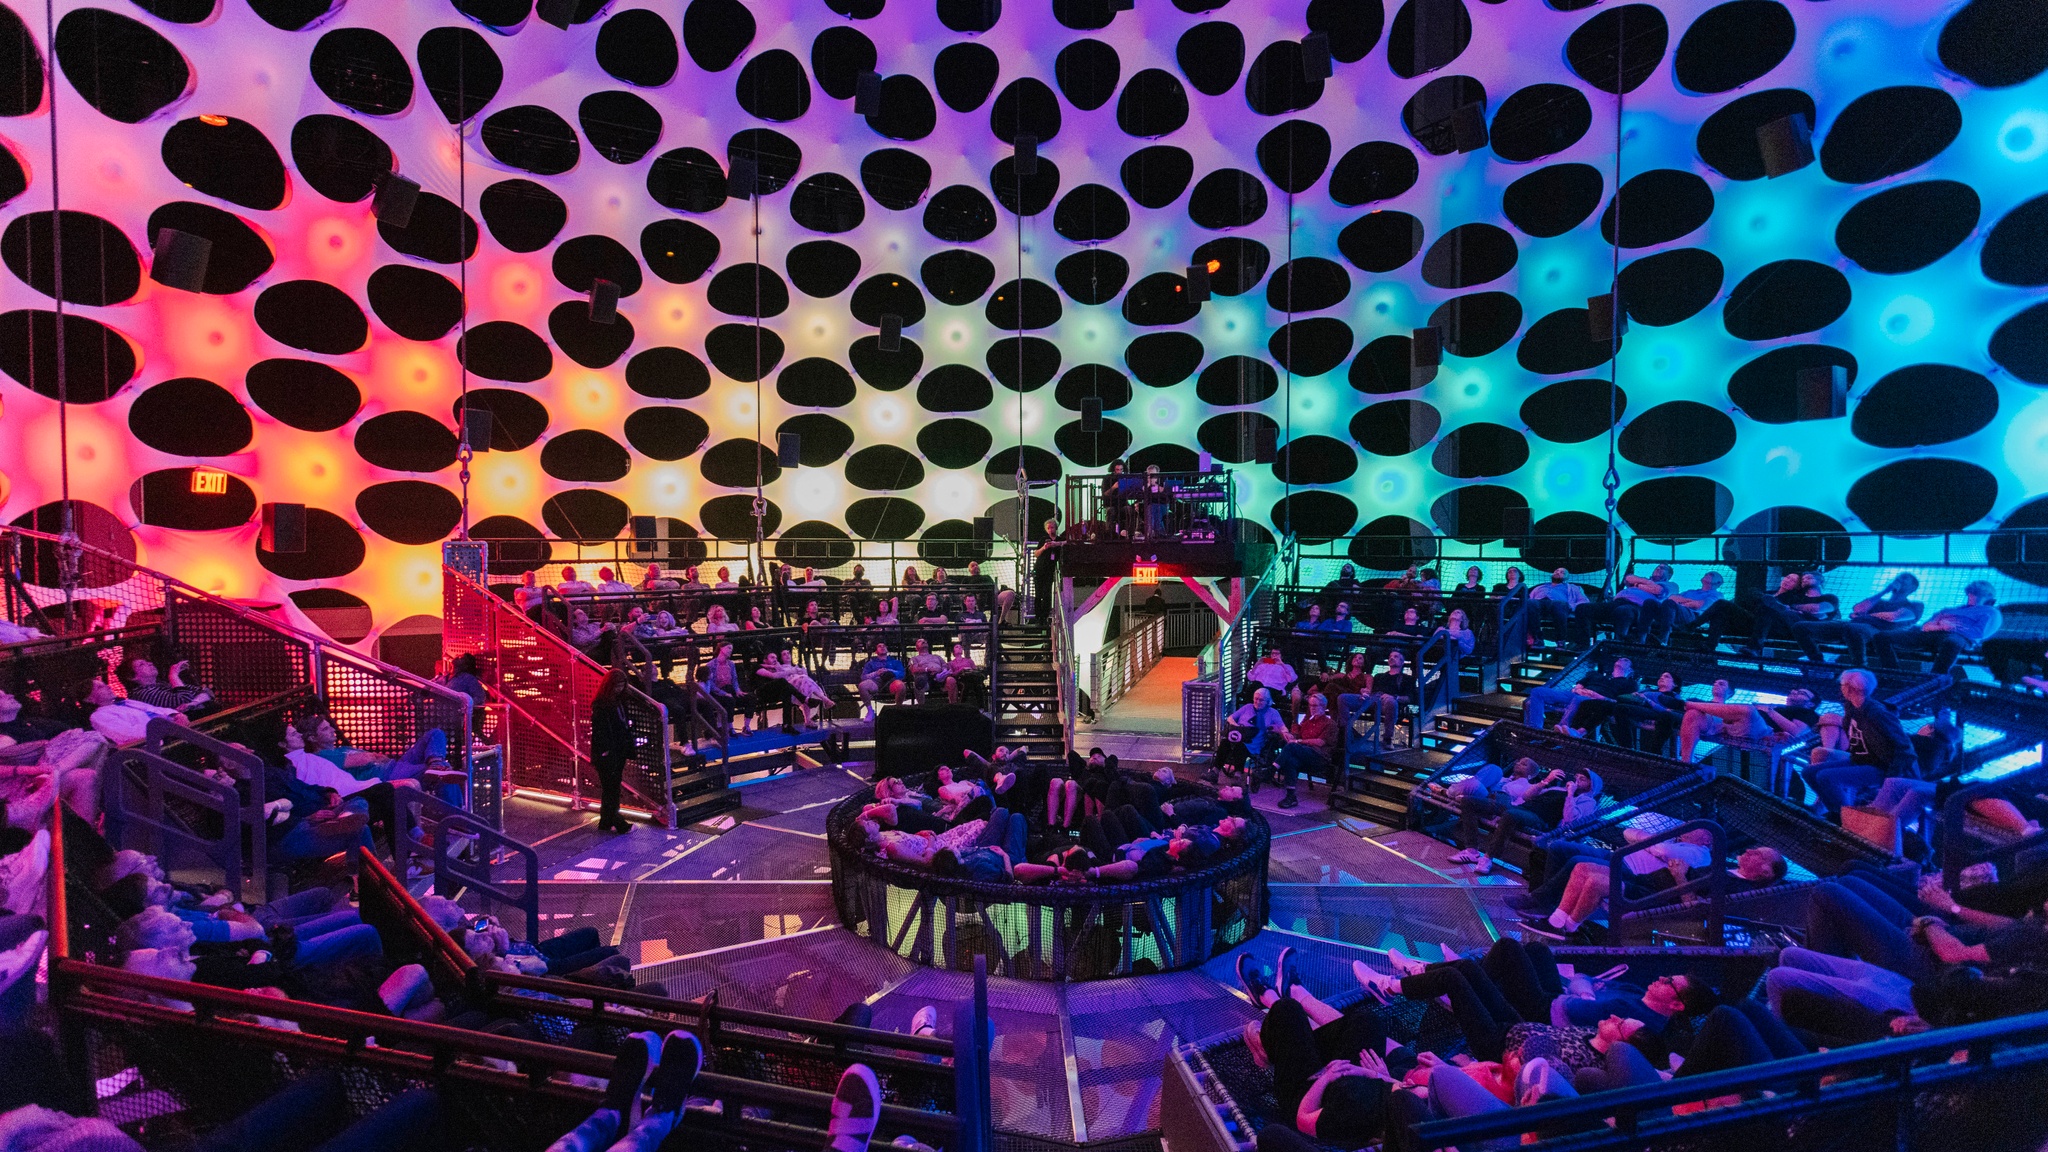 People in relaxed poses lie on their backs on netted seating banks inside a concert hall with a spherical wall. The wall is porous and composed of light nodes that emanate orange, purple, and blue light.